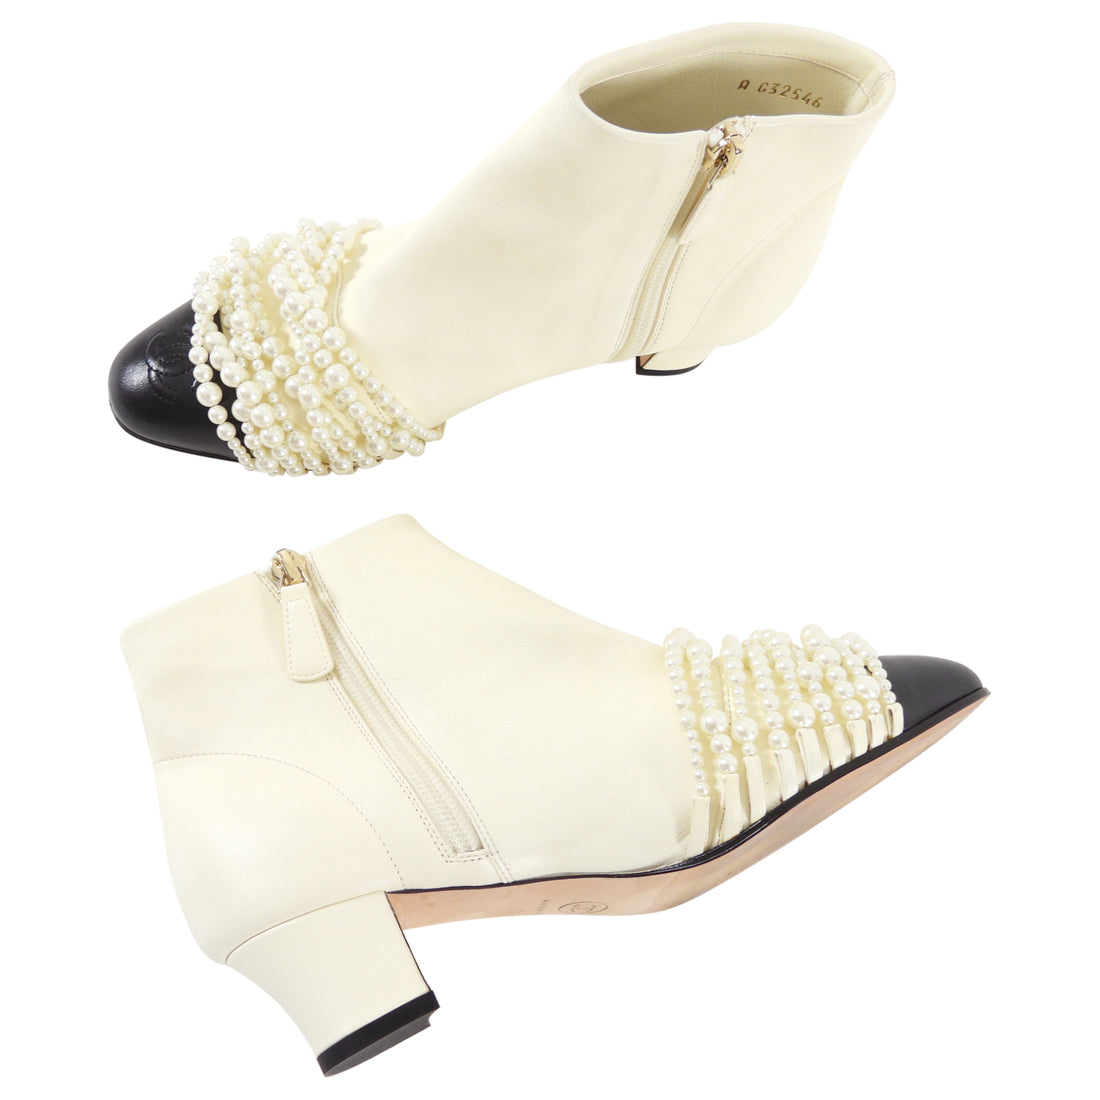 Chanel Two-Tone Ivory / Black Pearl Cap Toe Ankle Boot - 37